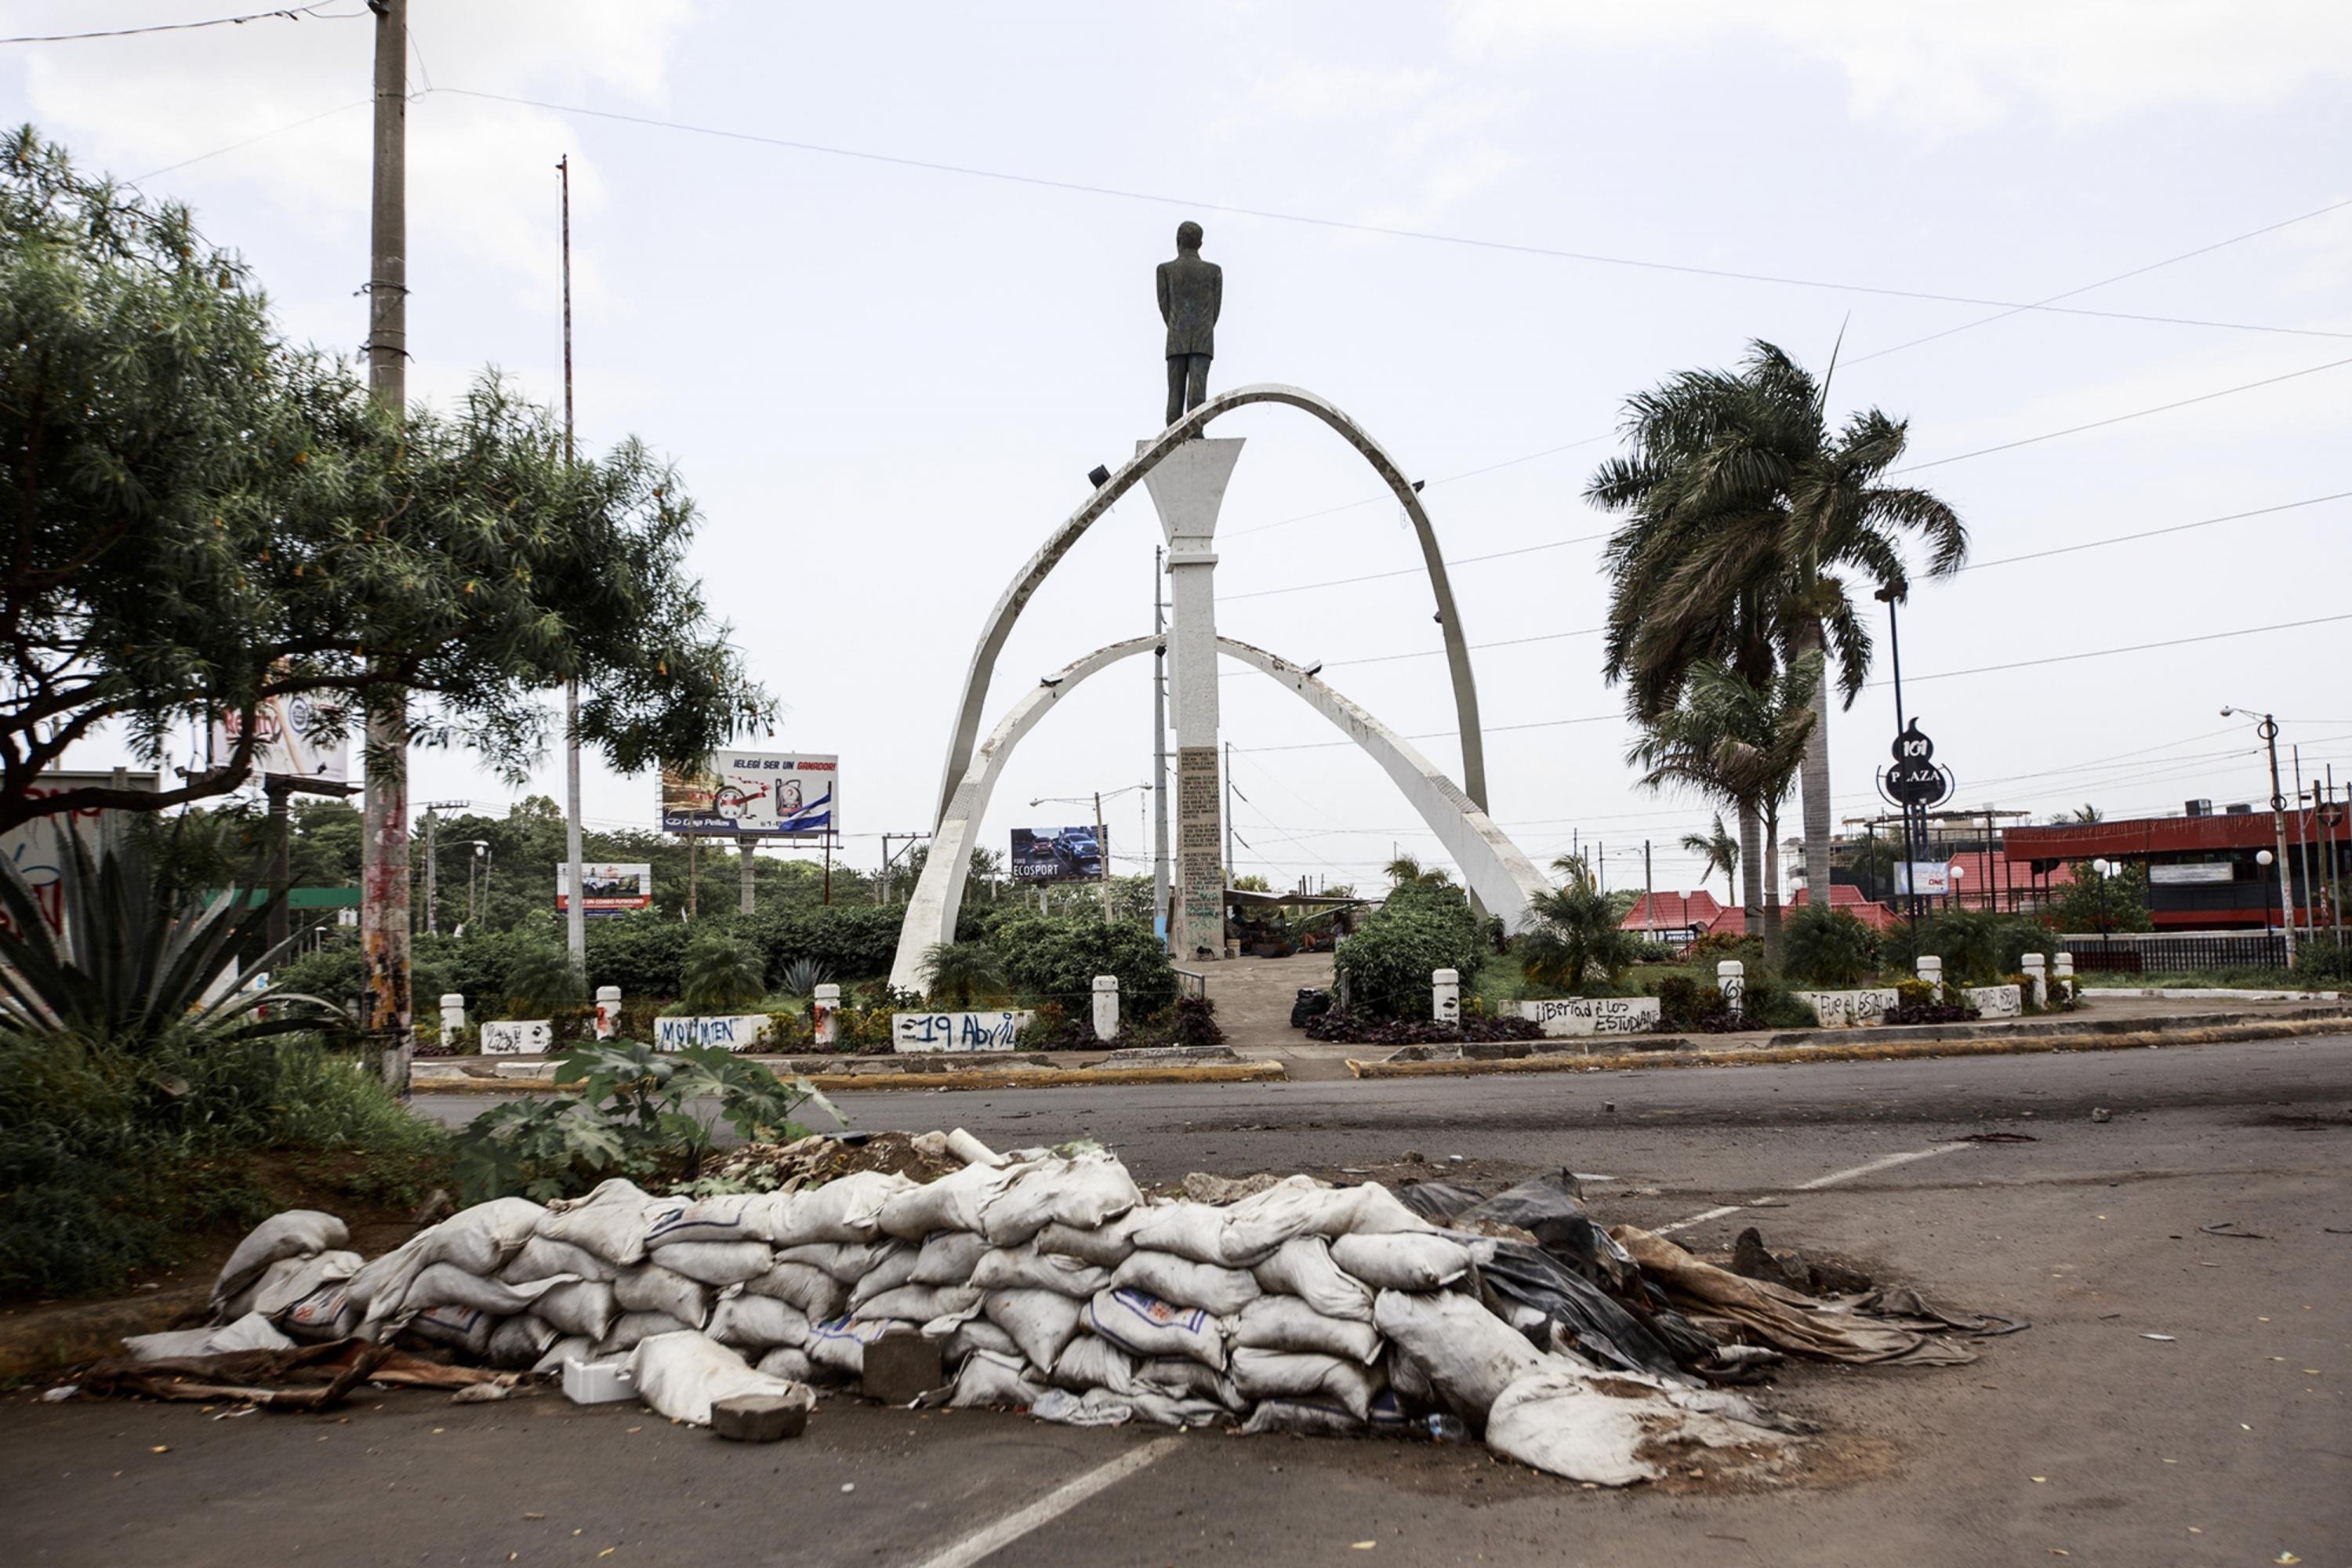 The Rigoberto López Pérez traffic circle, located near the UNAN-Managua campus, became a battleground for police and student protestors long before the July 13 eviction. Managua, June 30, 2018. Photo Fred Ramos